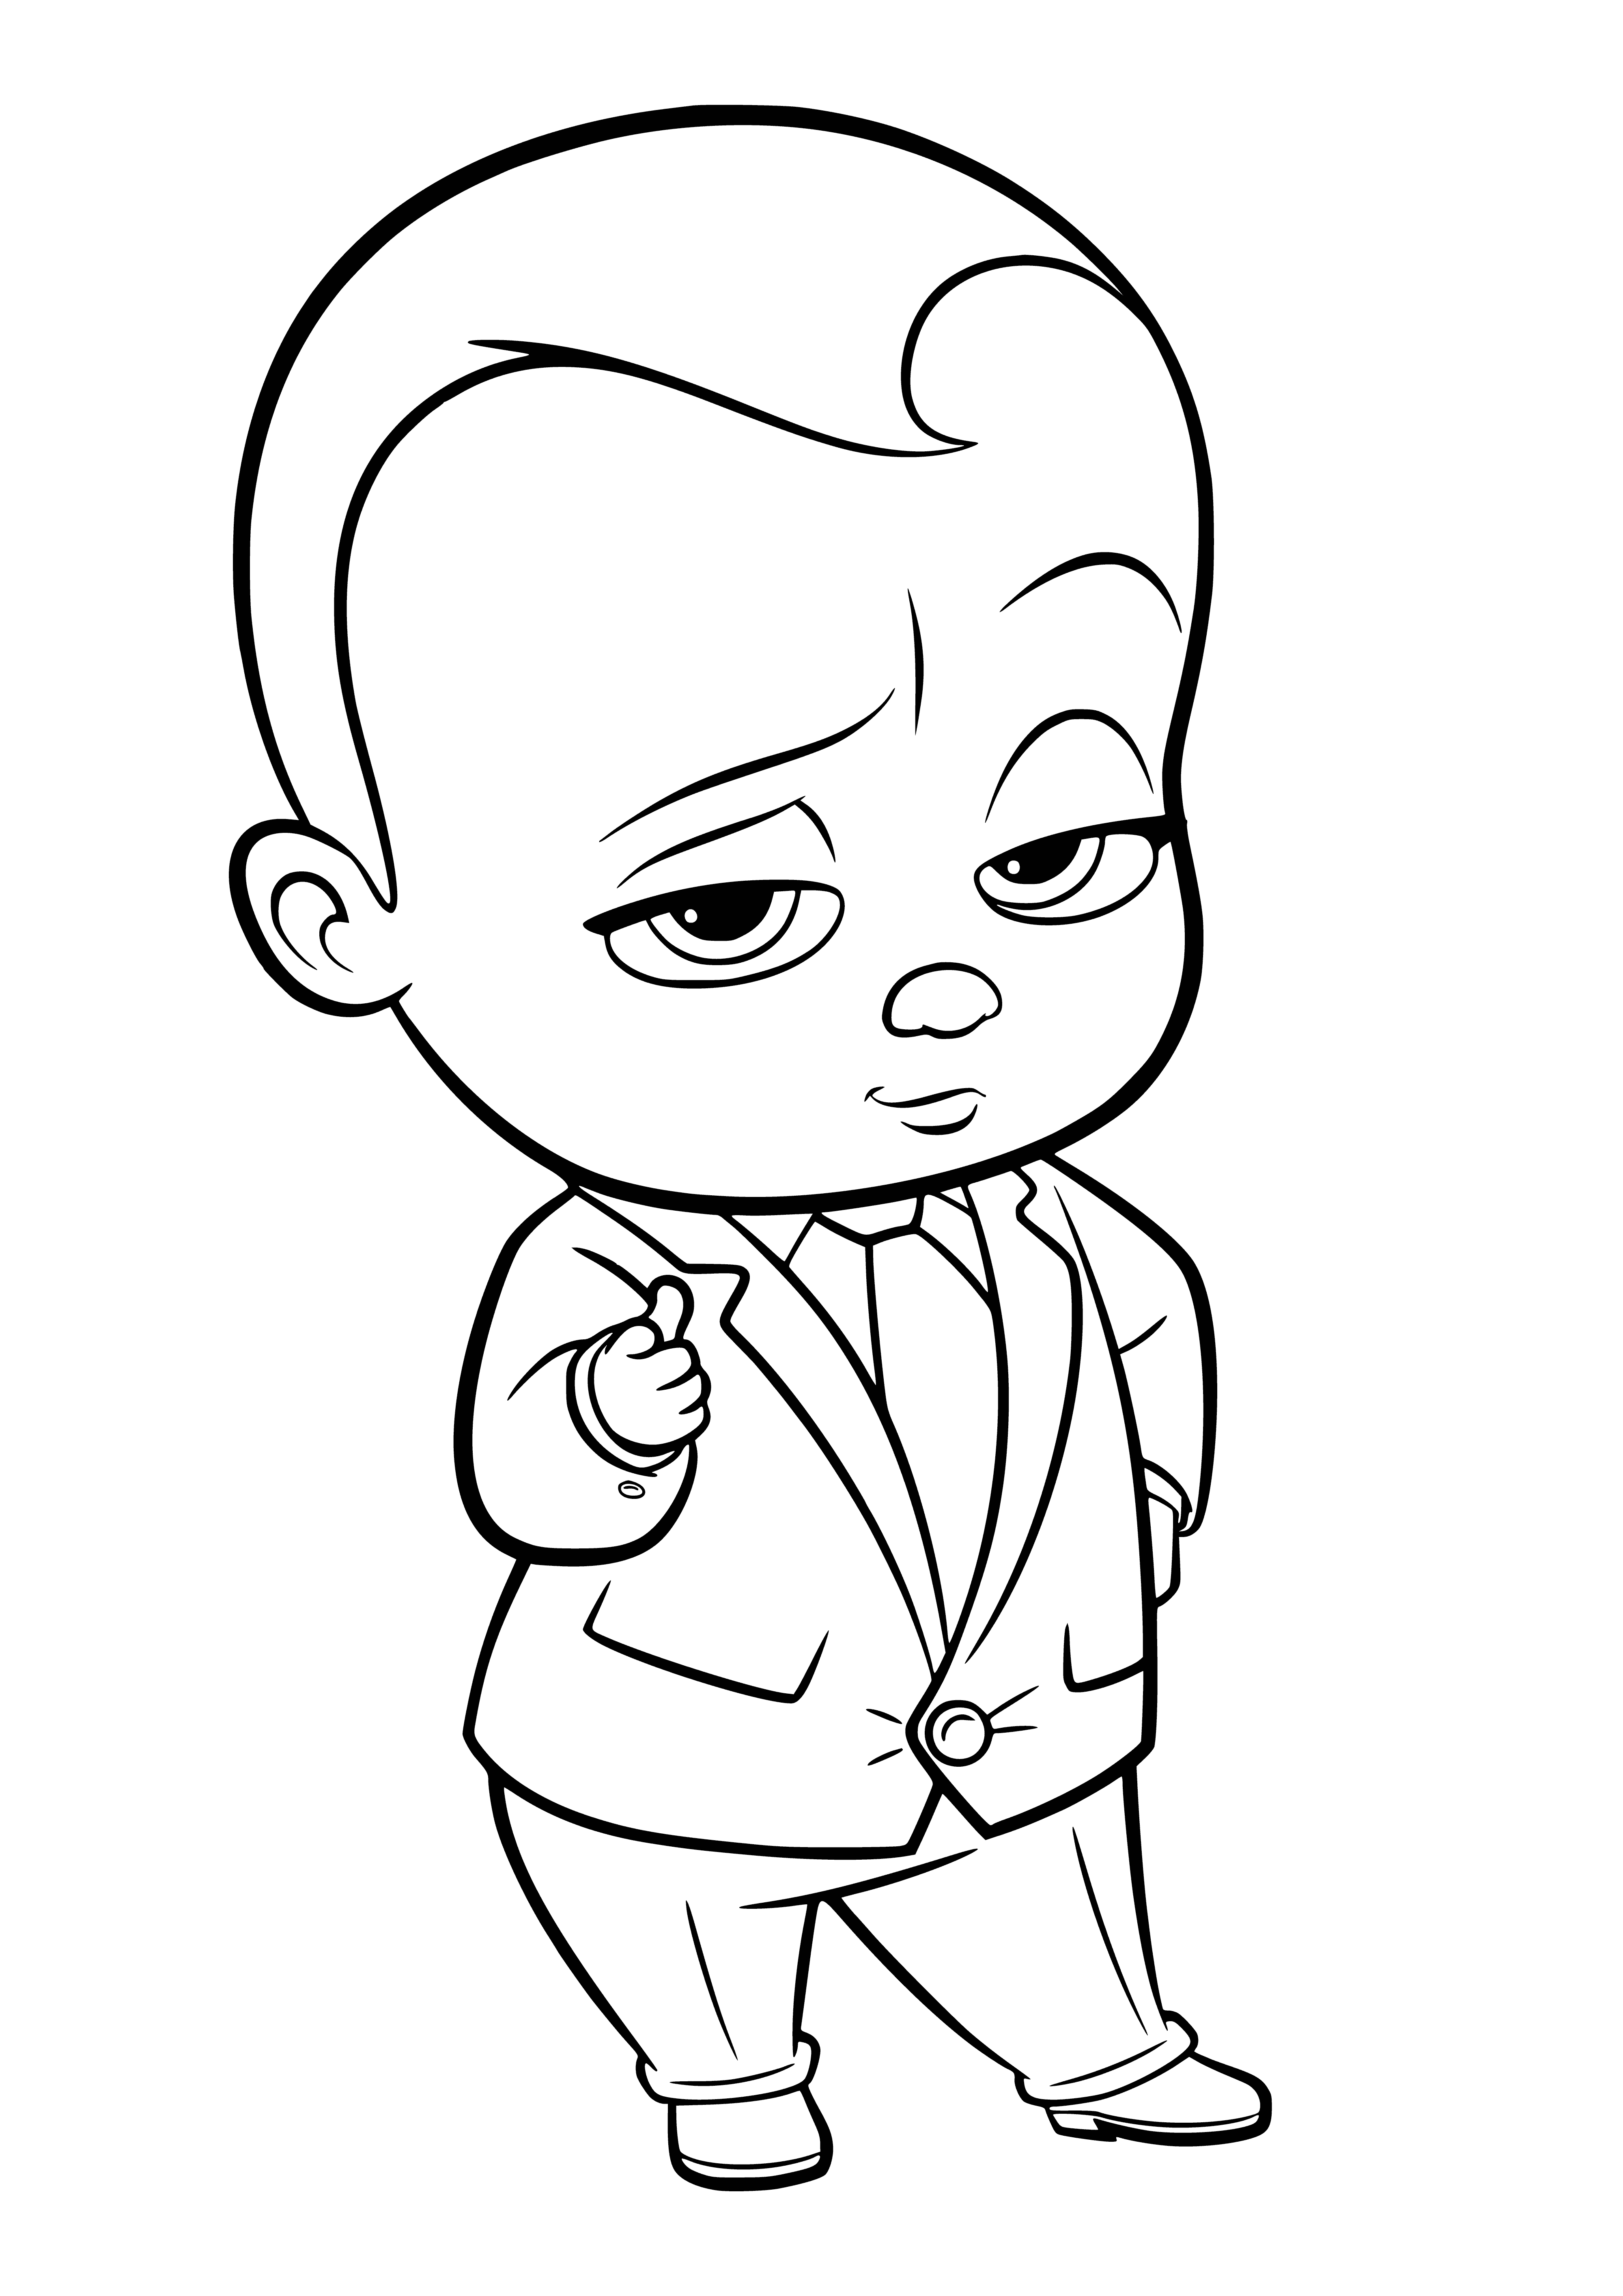 coloring page: Baby in business suit in high chair holding rattle, jar of baby food on tray in front. Determined face on baby!